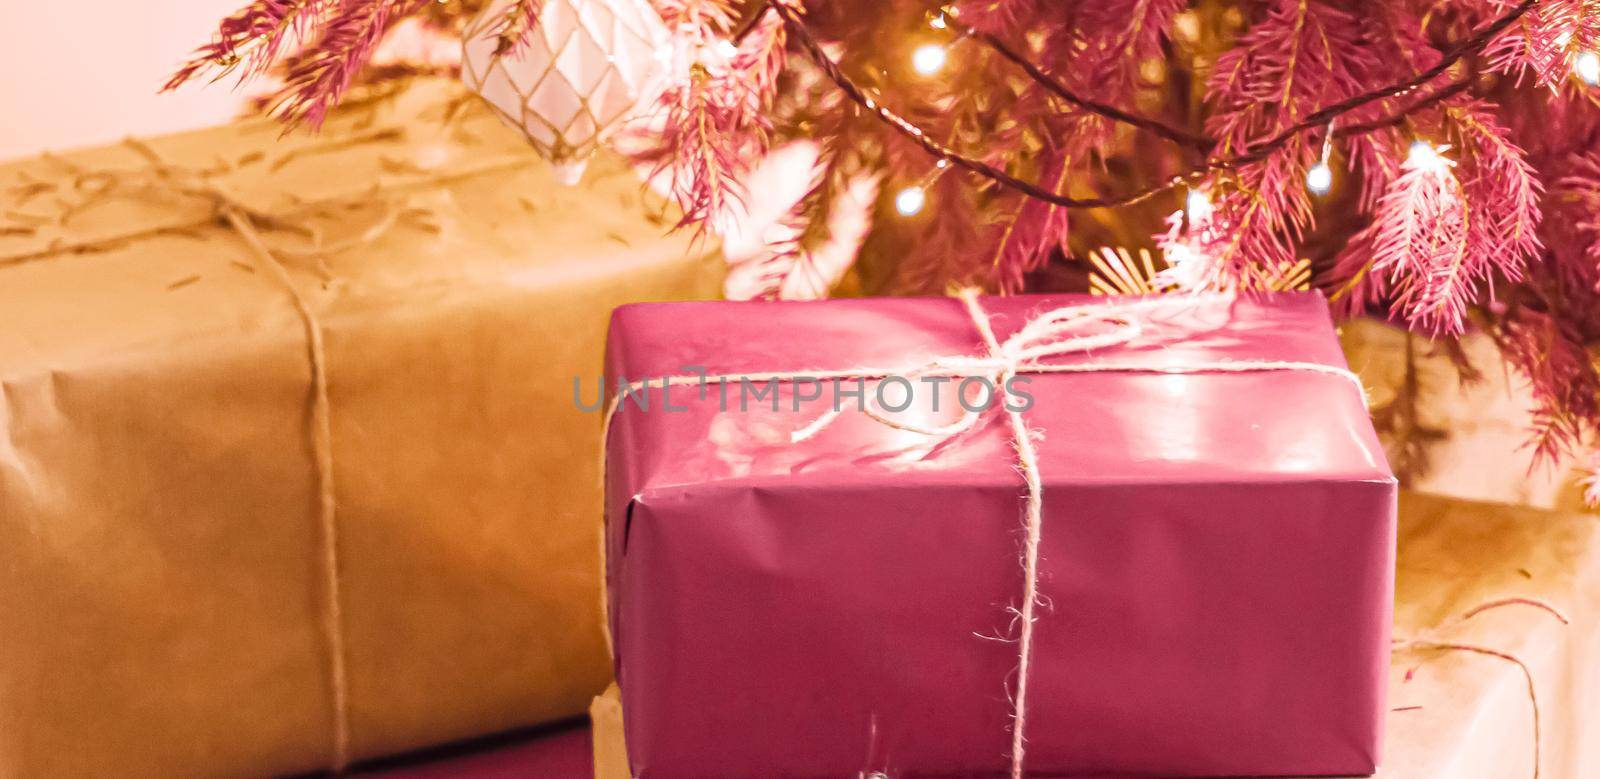 Christmas holiday delivery and sustainable gifts concept. Pink gift boxes wrapped in eco-friendly packaging with recycled paper under decorated xmas tree.